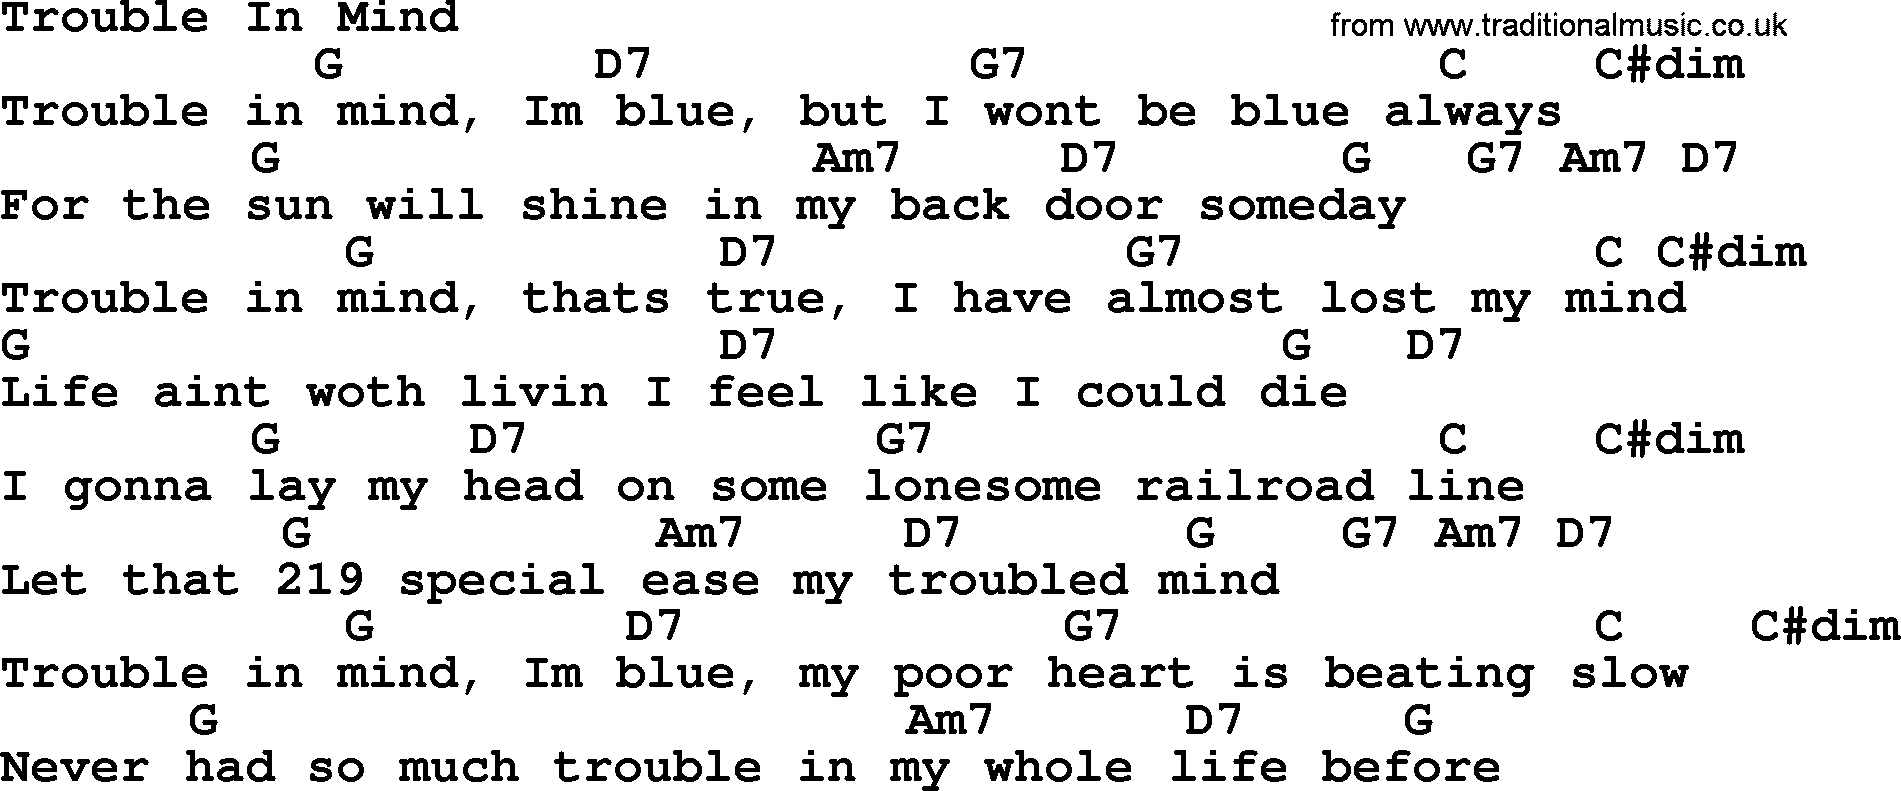 Bluegrass song: Trouble In Mind, lyrics and chords